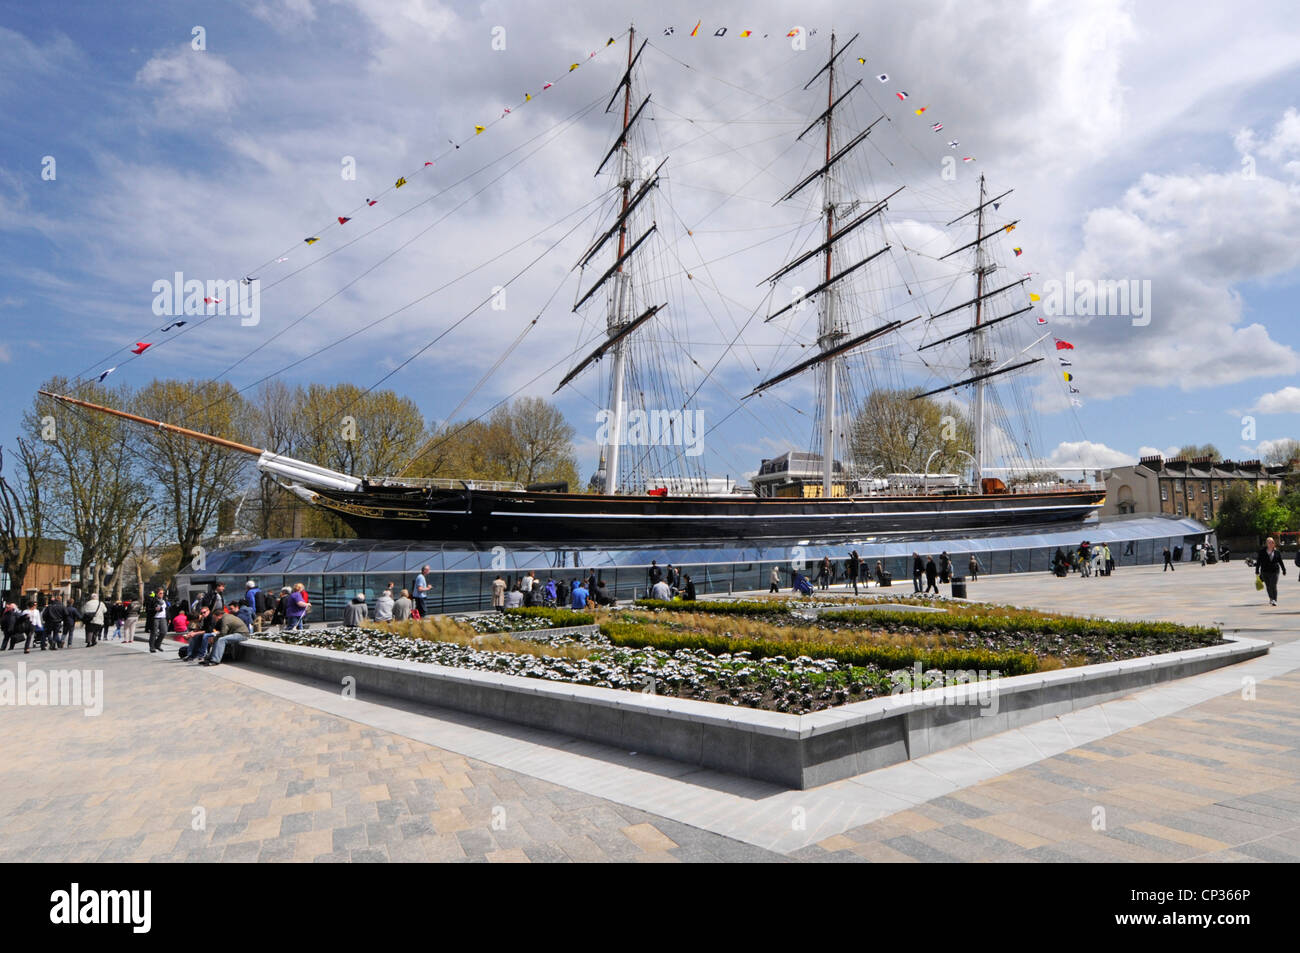 People sightseeing paved open space at historical Cutty Sark tea clipper ship open to onboard visitors after restoration Greenwich London England UK Stock Photo